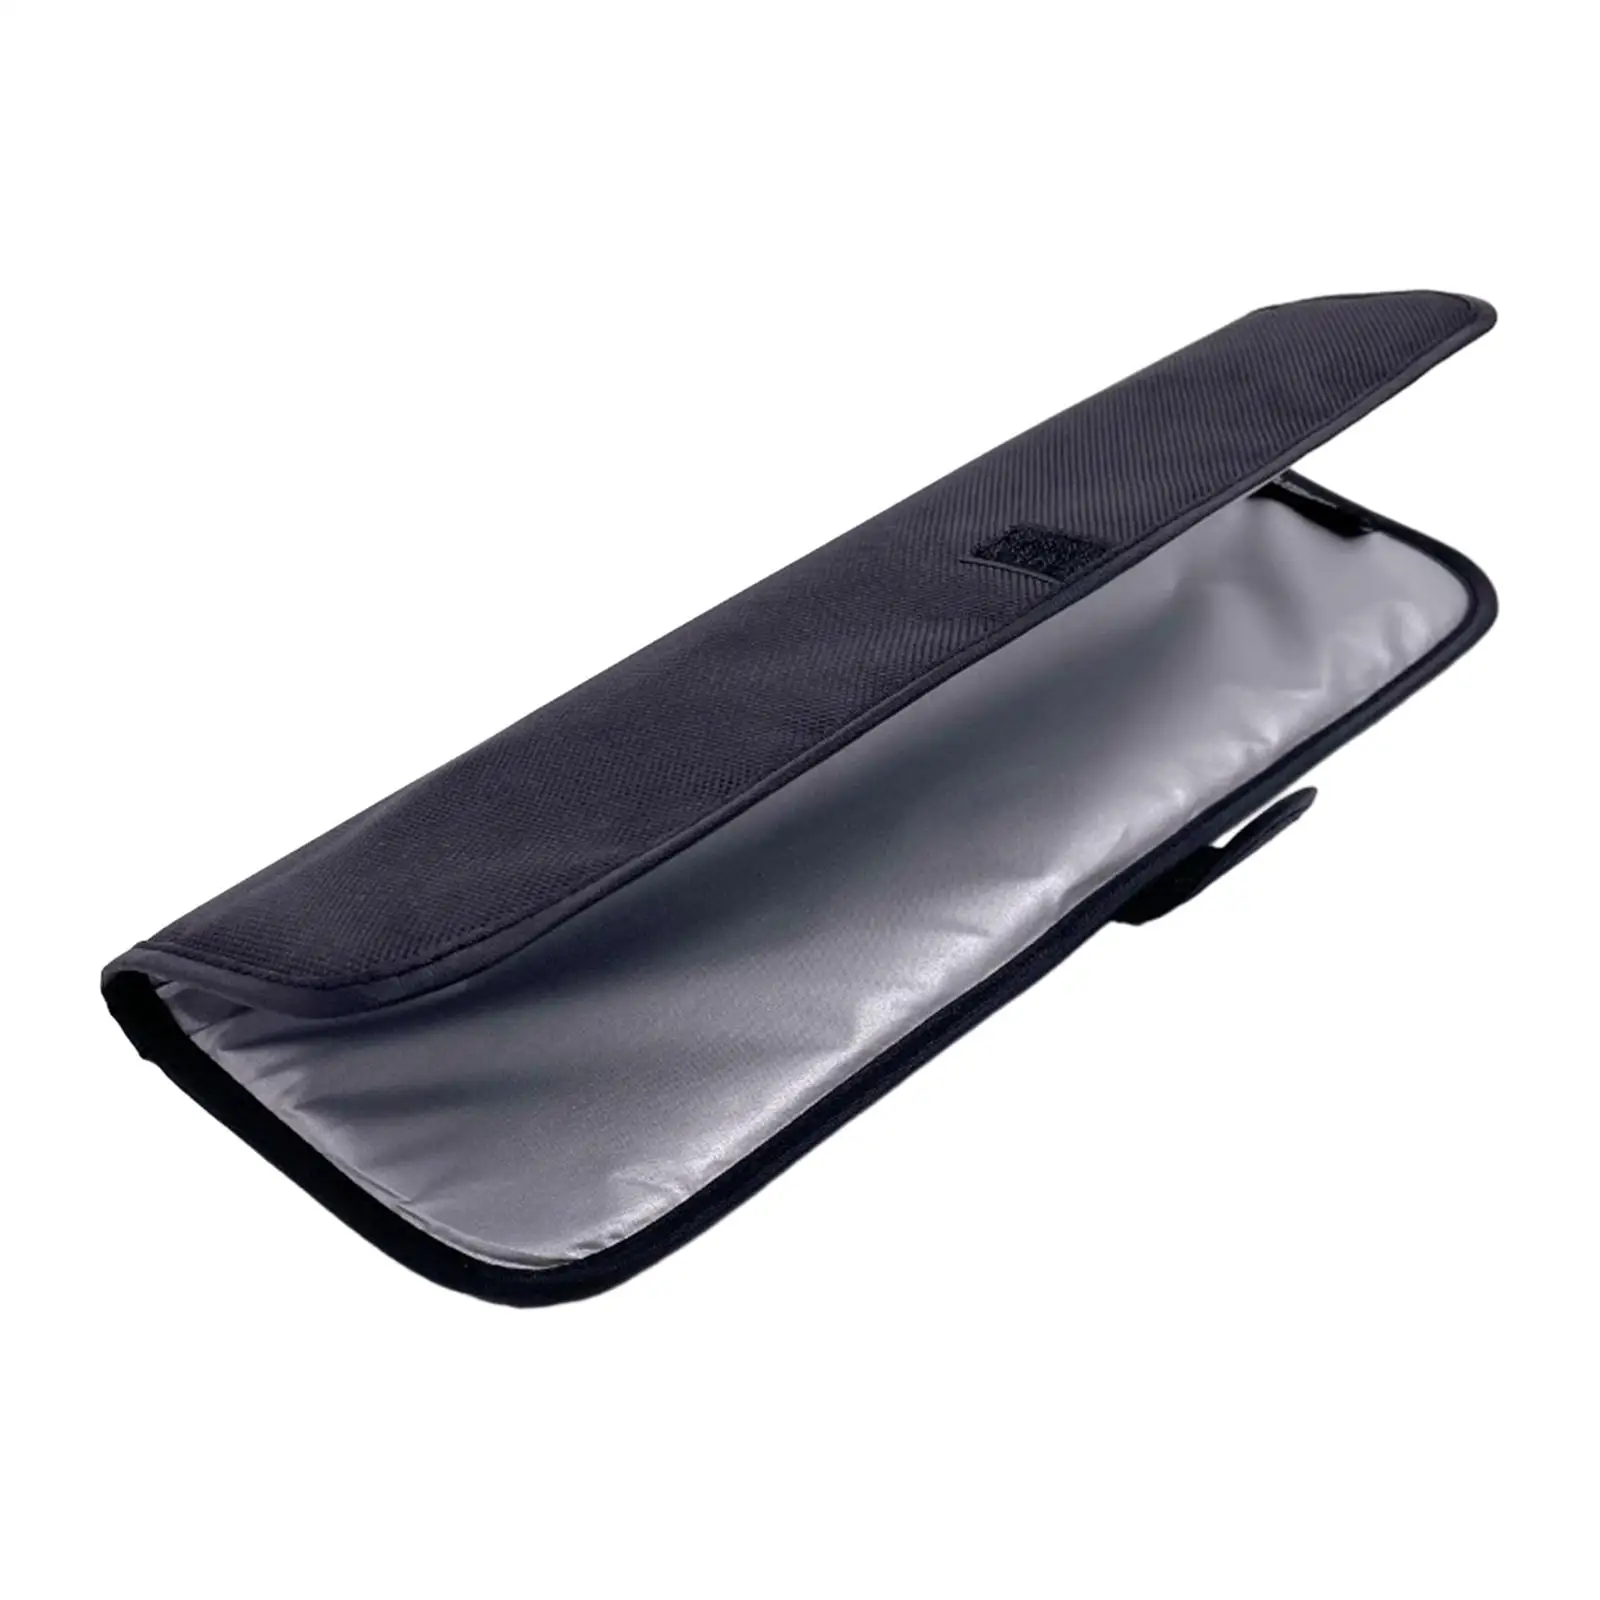 Hair Tools Travel Bag Portable Accessories Flat Iron Travel Case for Combs Styling Irons Clippers Flat Iron Straighteners